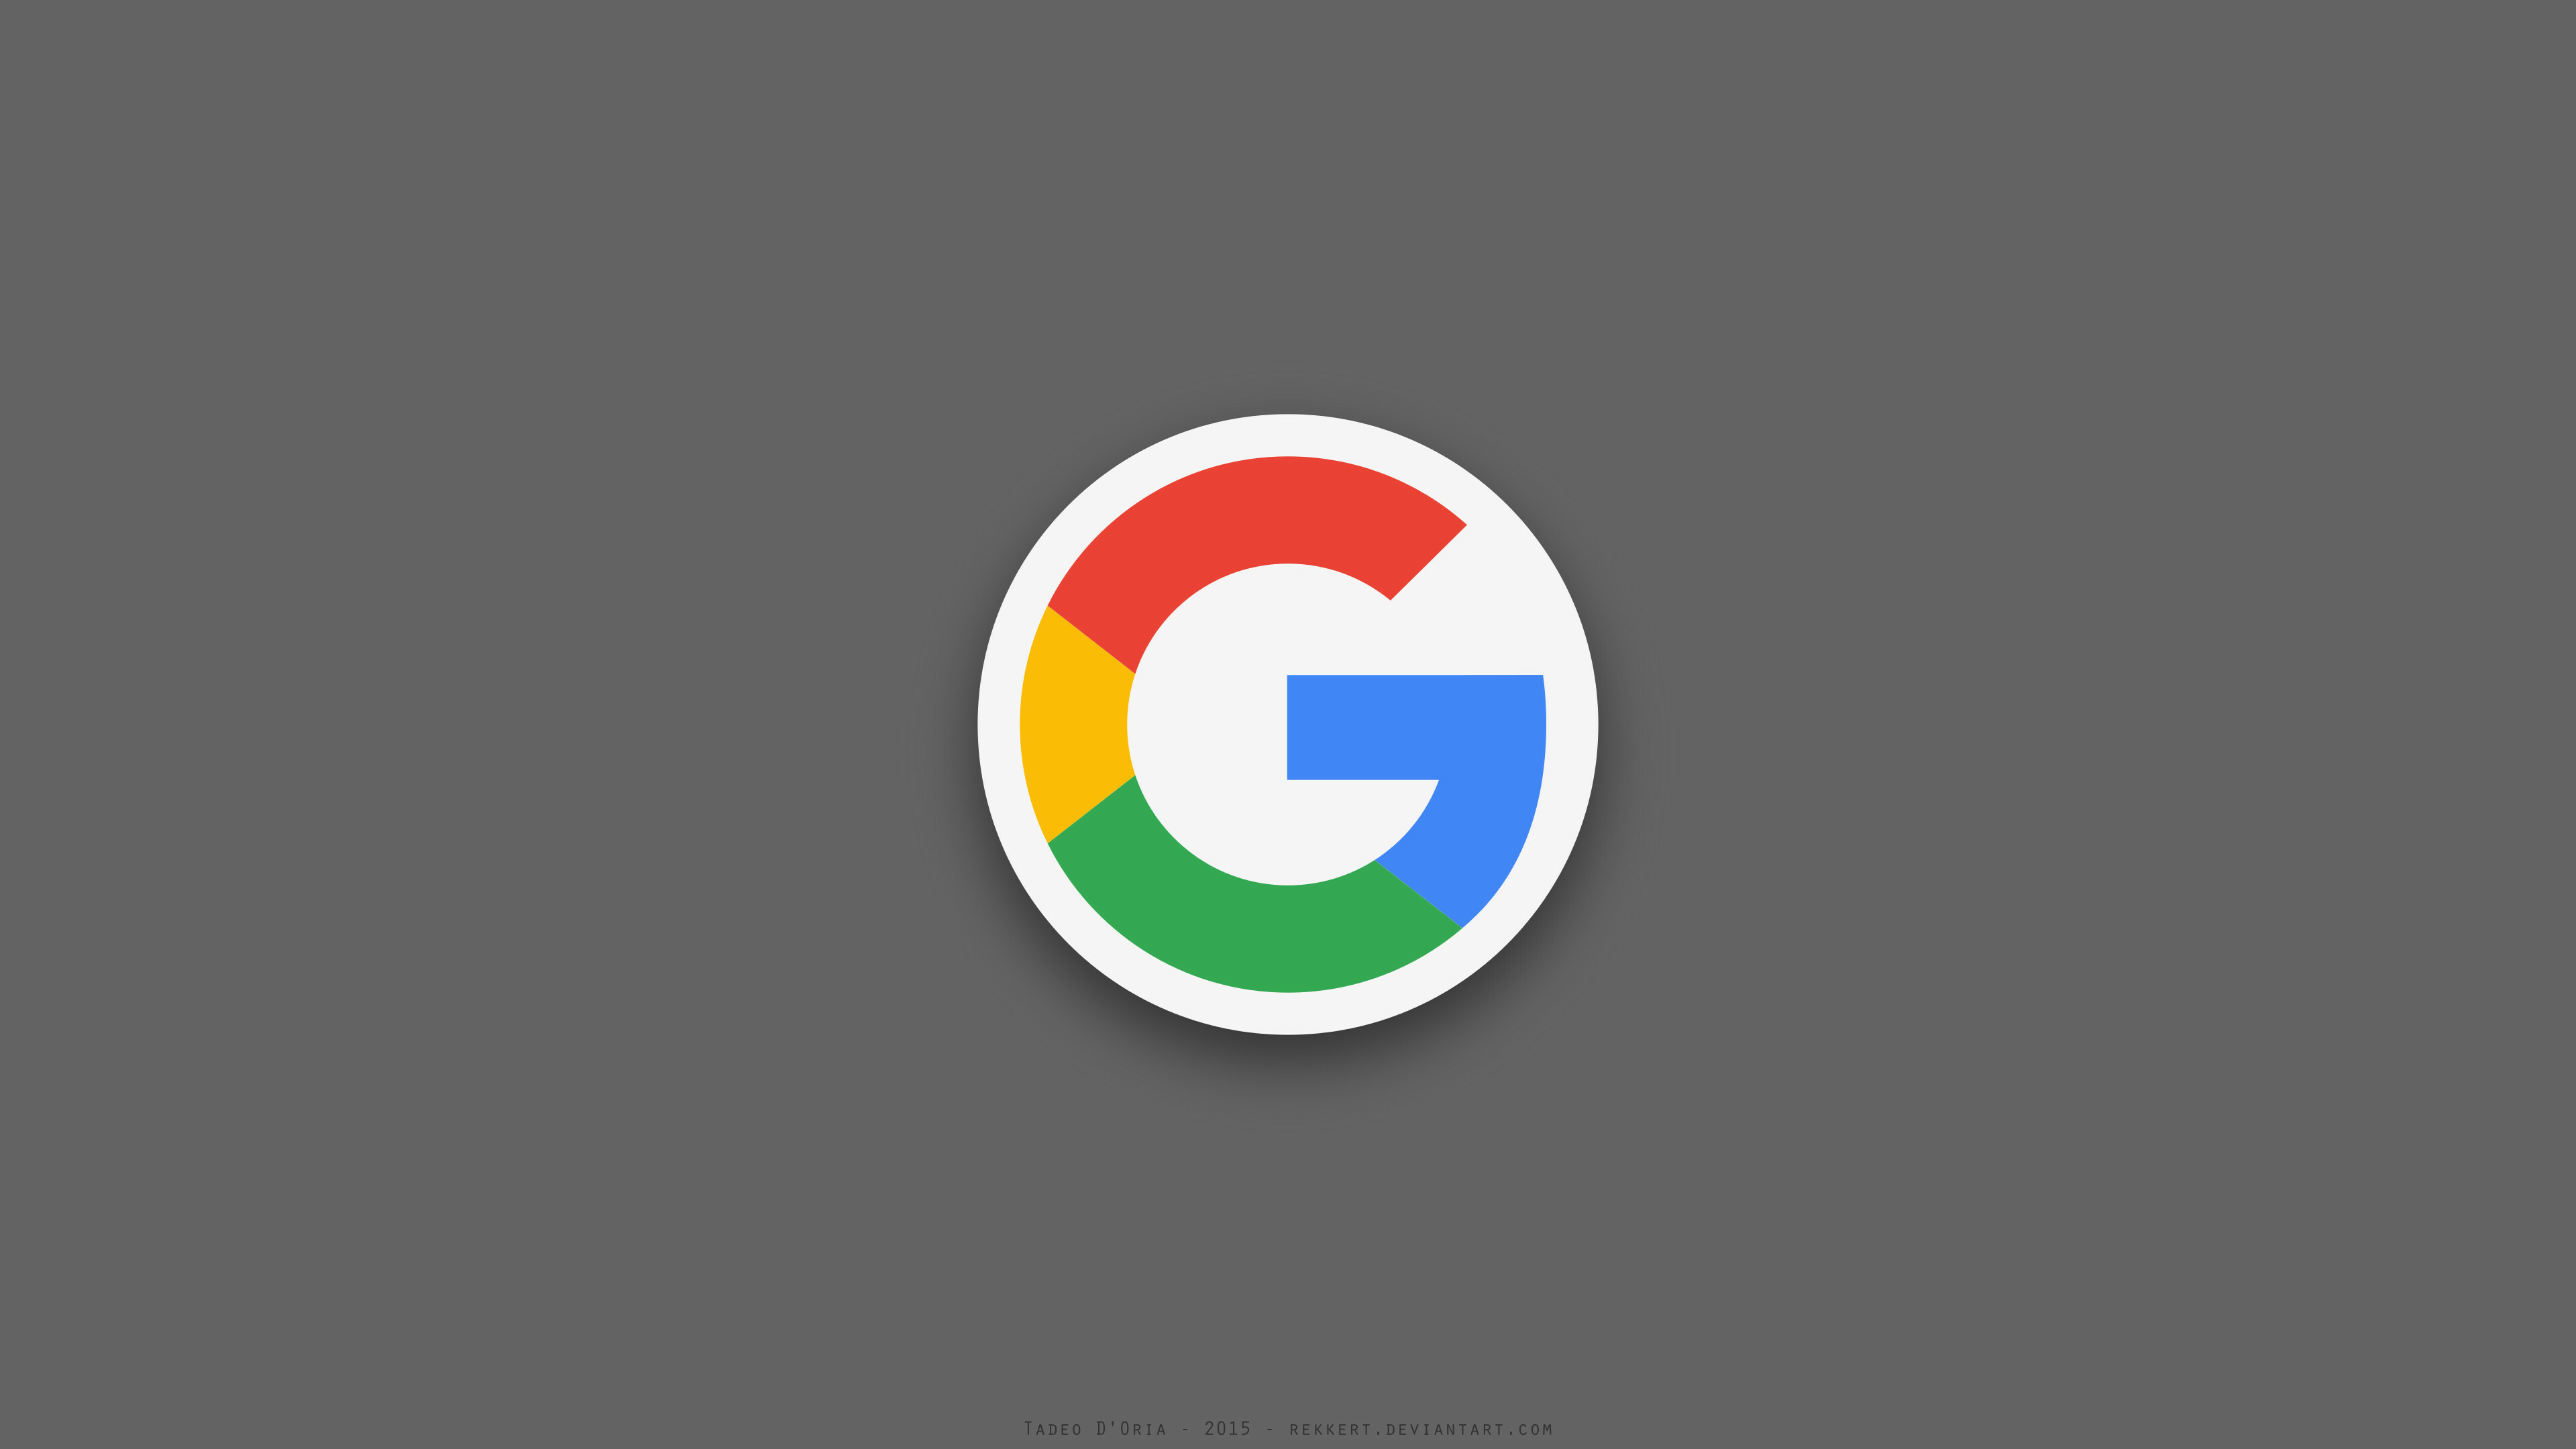 Google: Provides access to billions of webpages, Chrome. 3840x2160 4K Wallpaper.